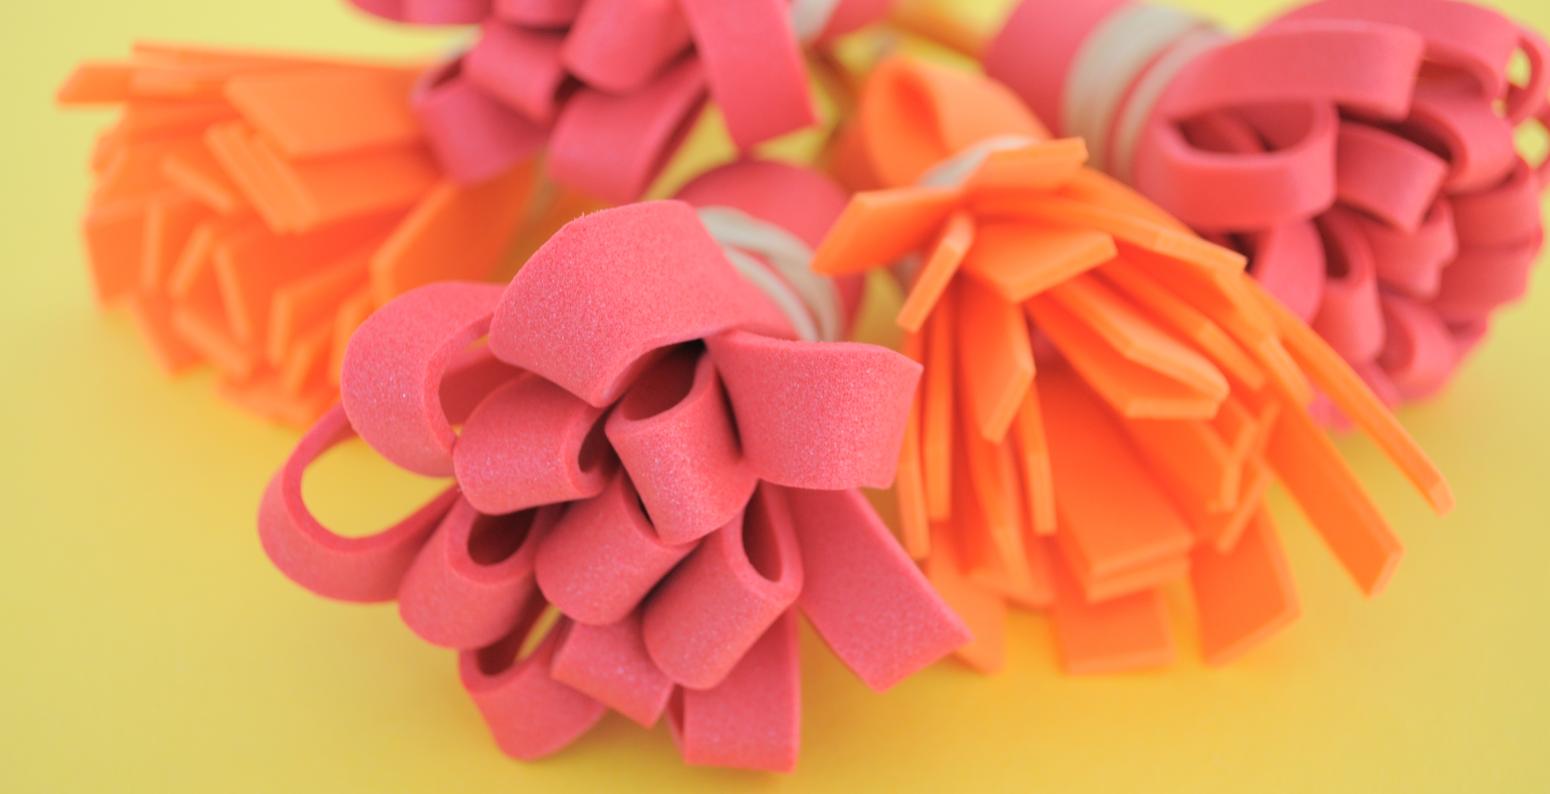 A colorful pile of paintbrushes with the bristles made from cut foam strips.